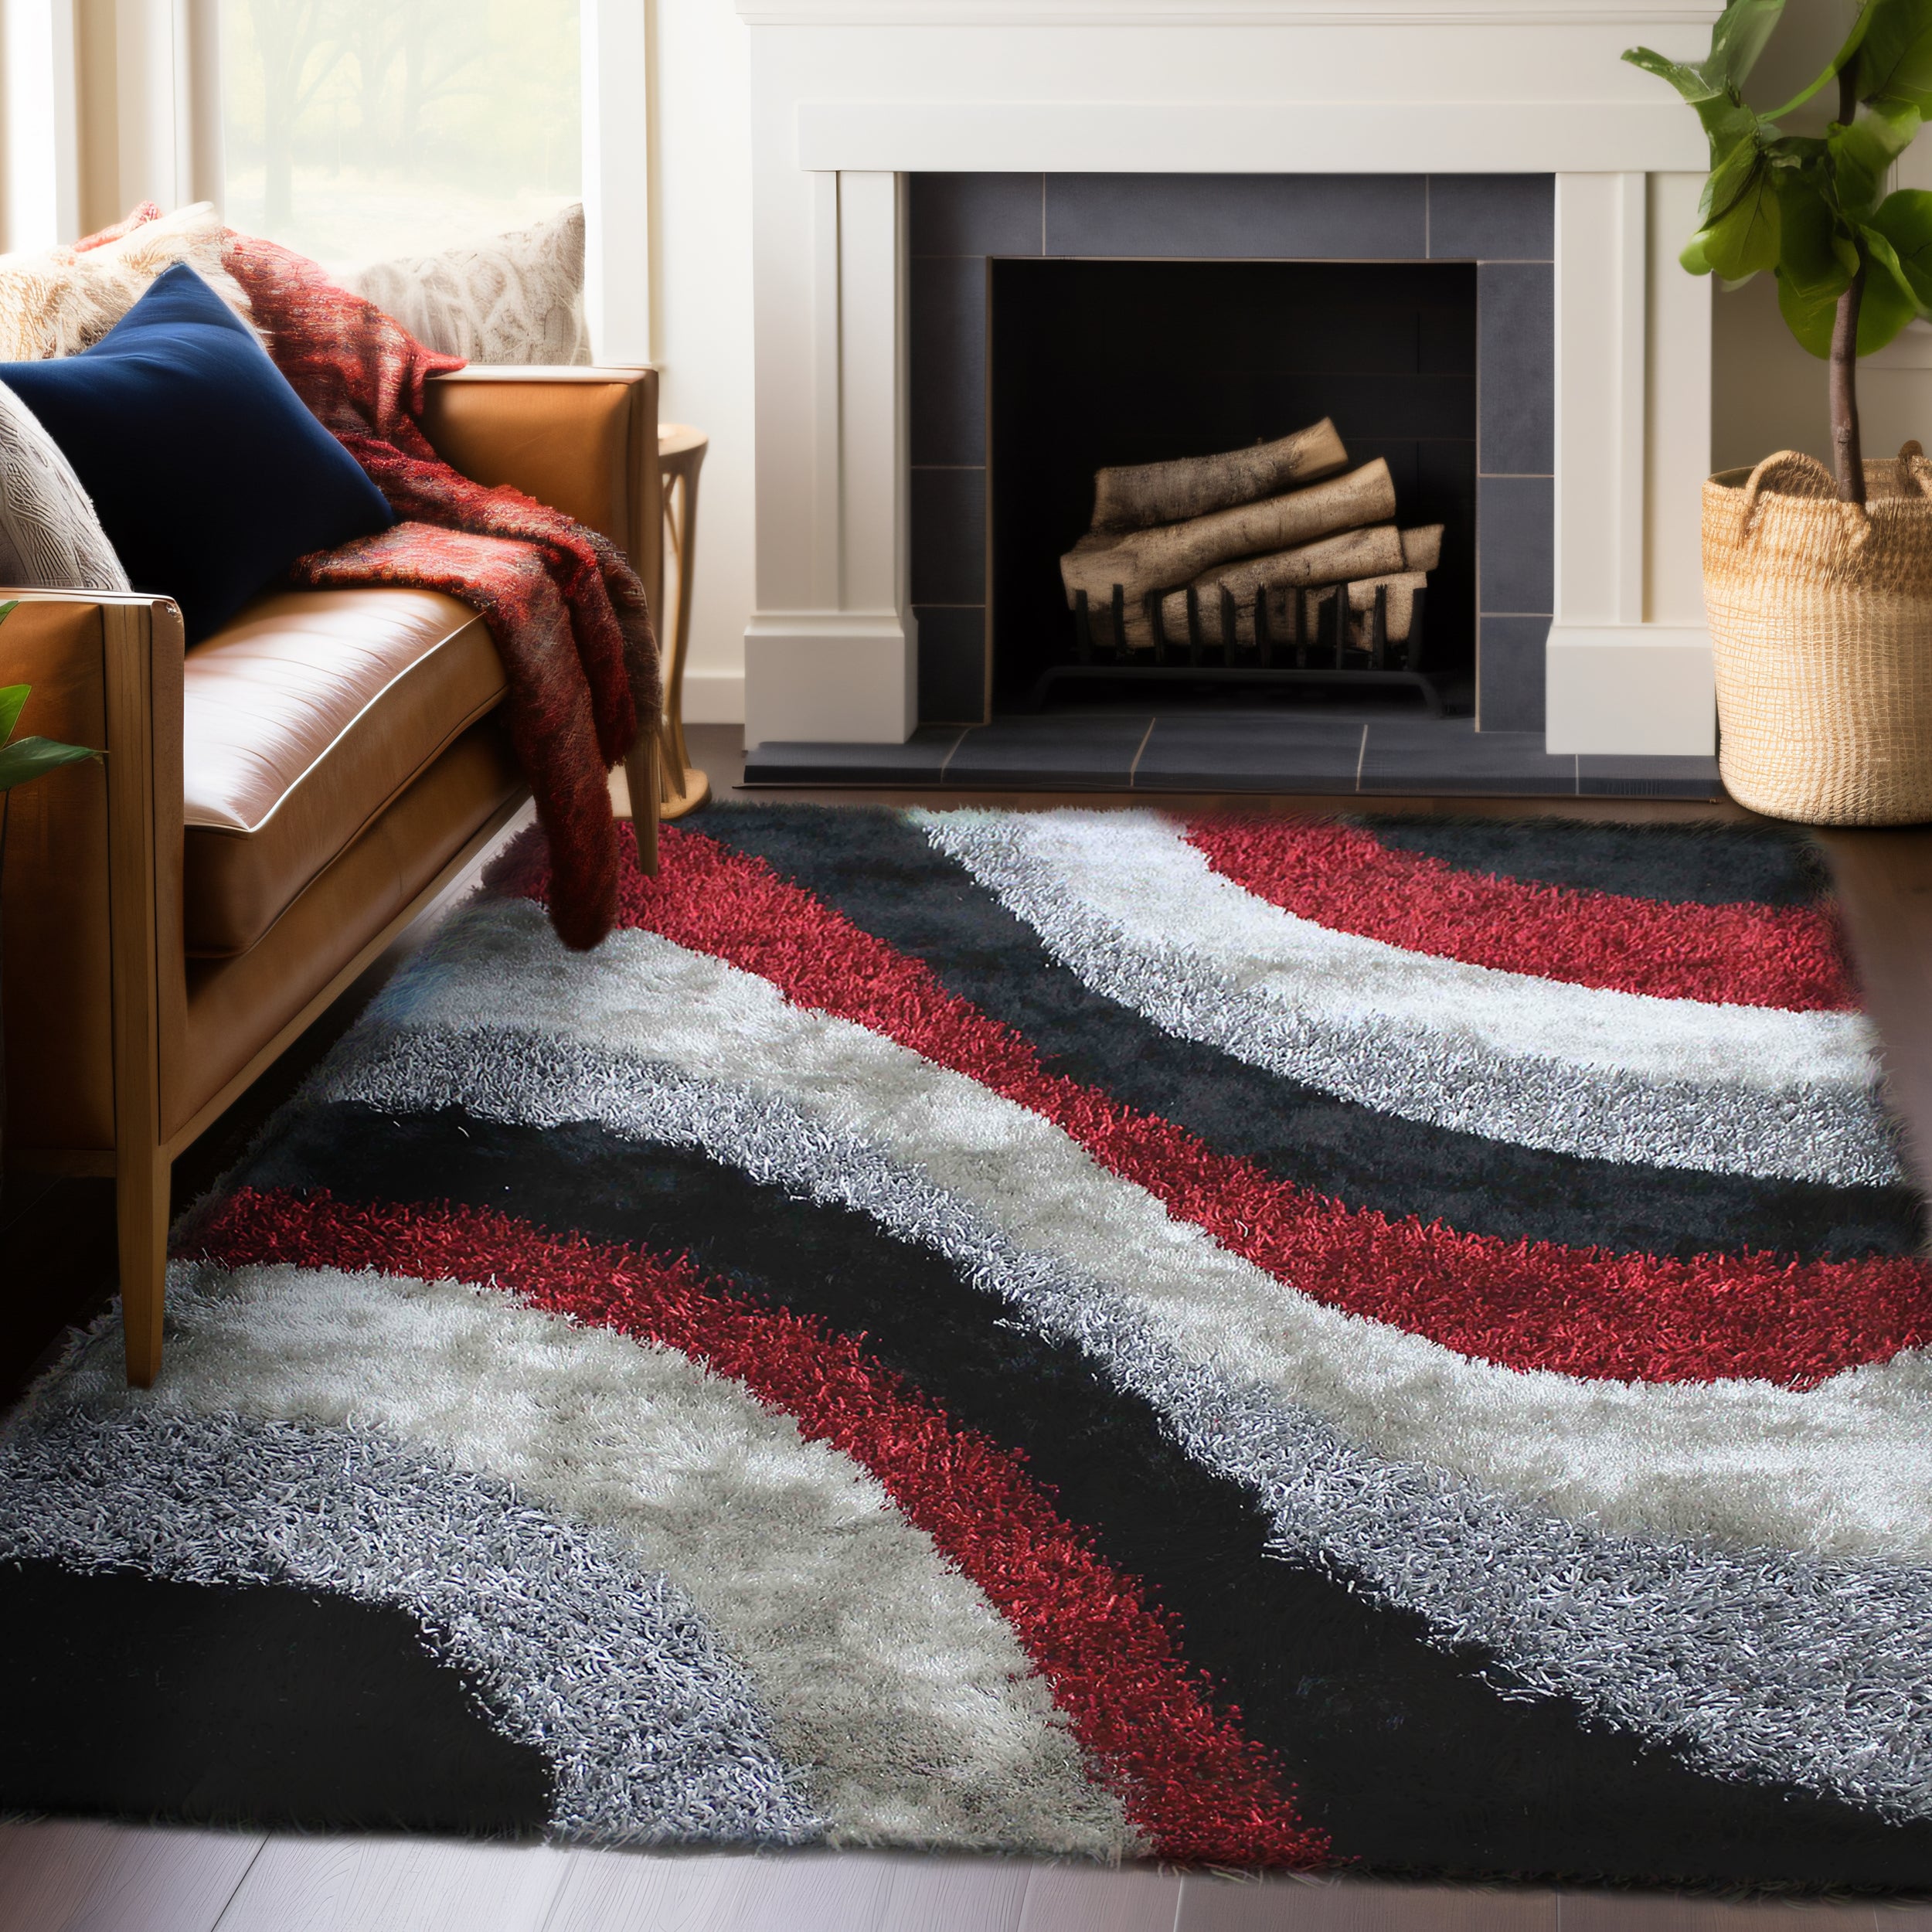 Striped Red Black And Light Gray Shag Area Rug